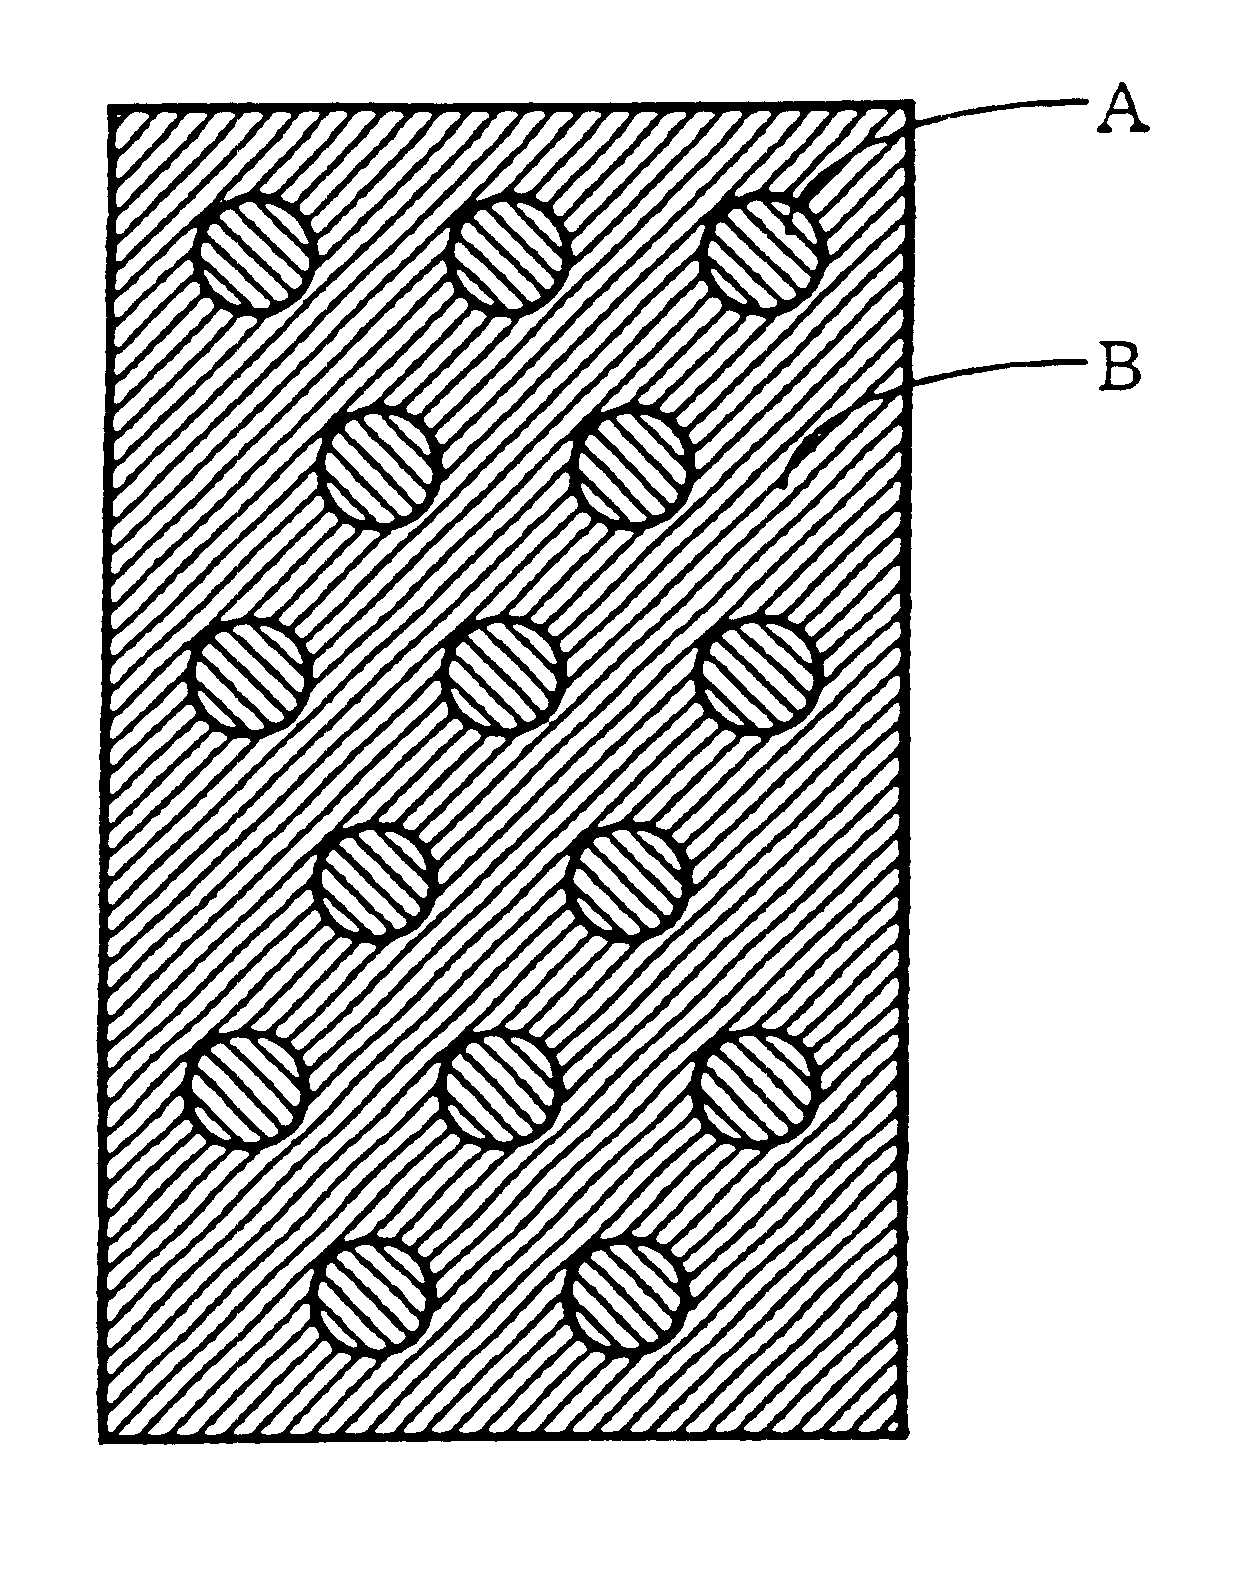 Apparatus for producing deionized water